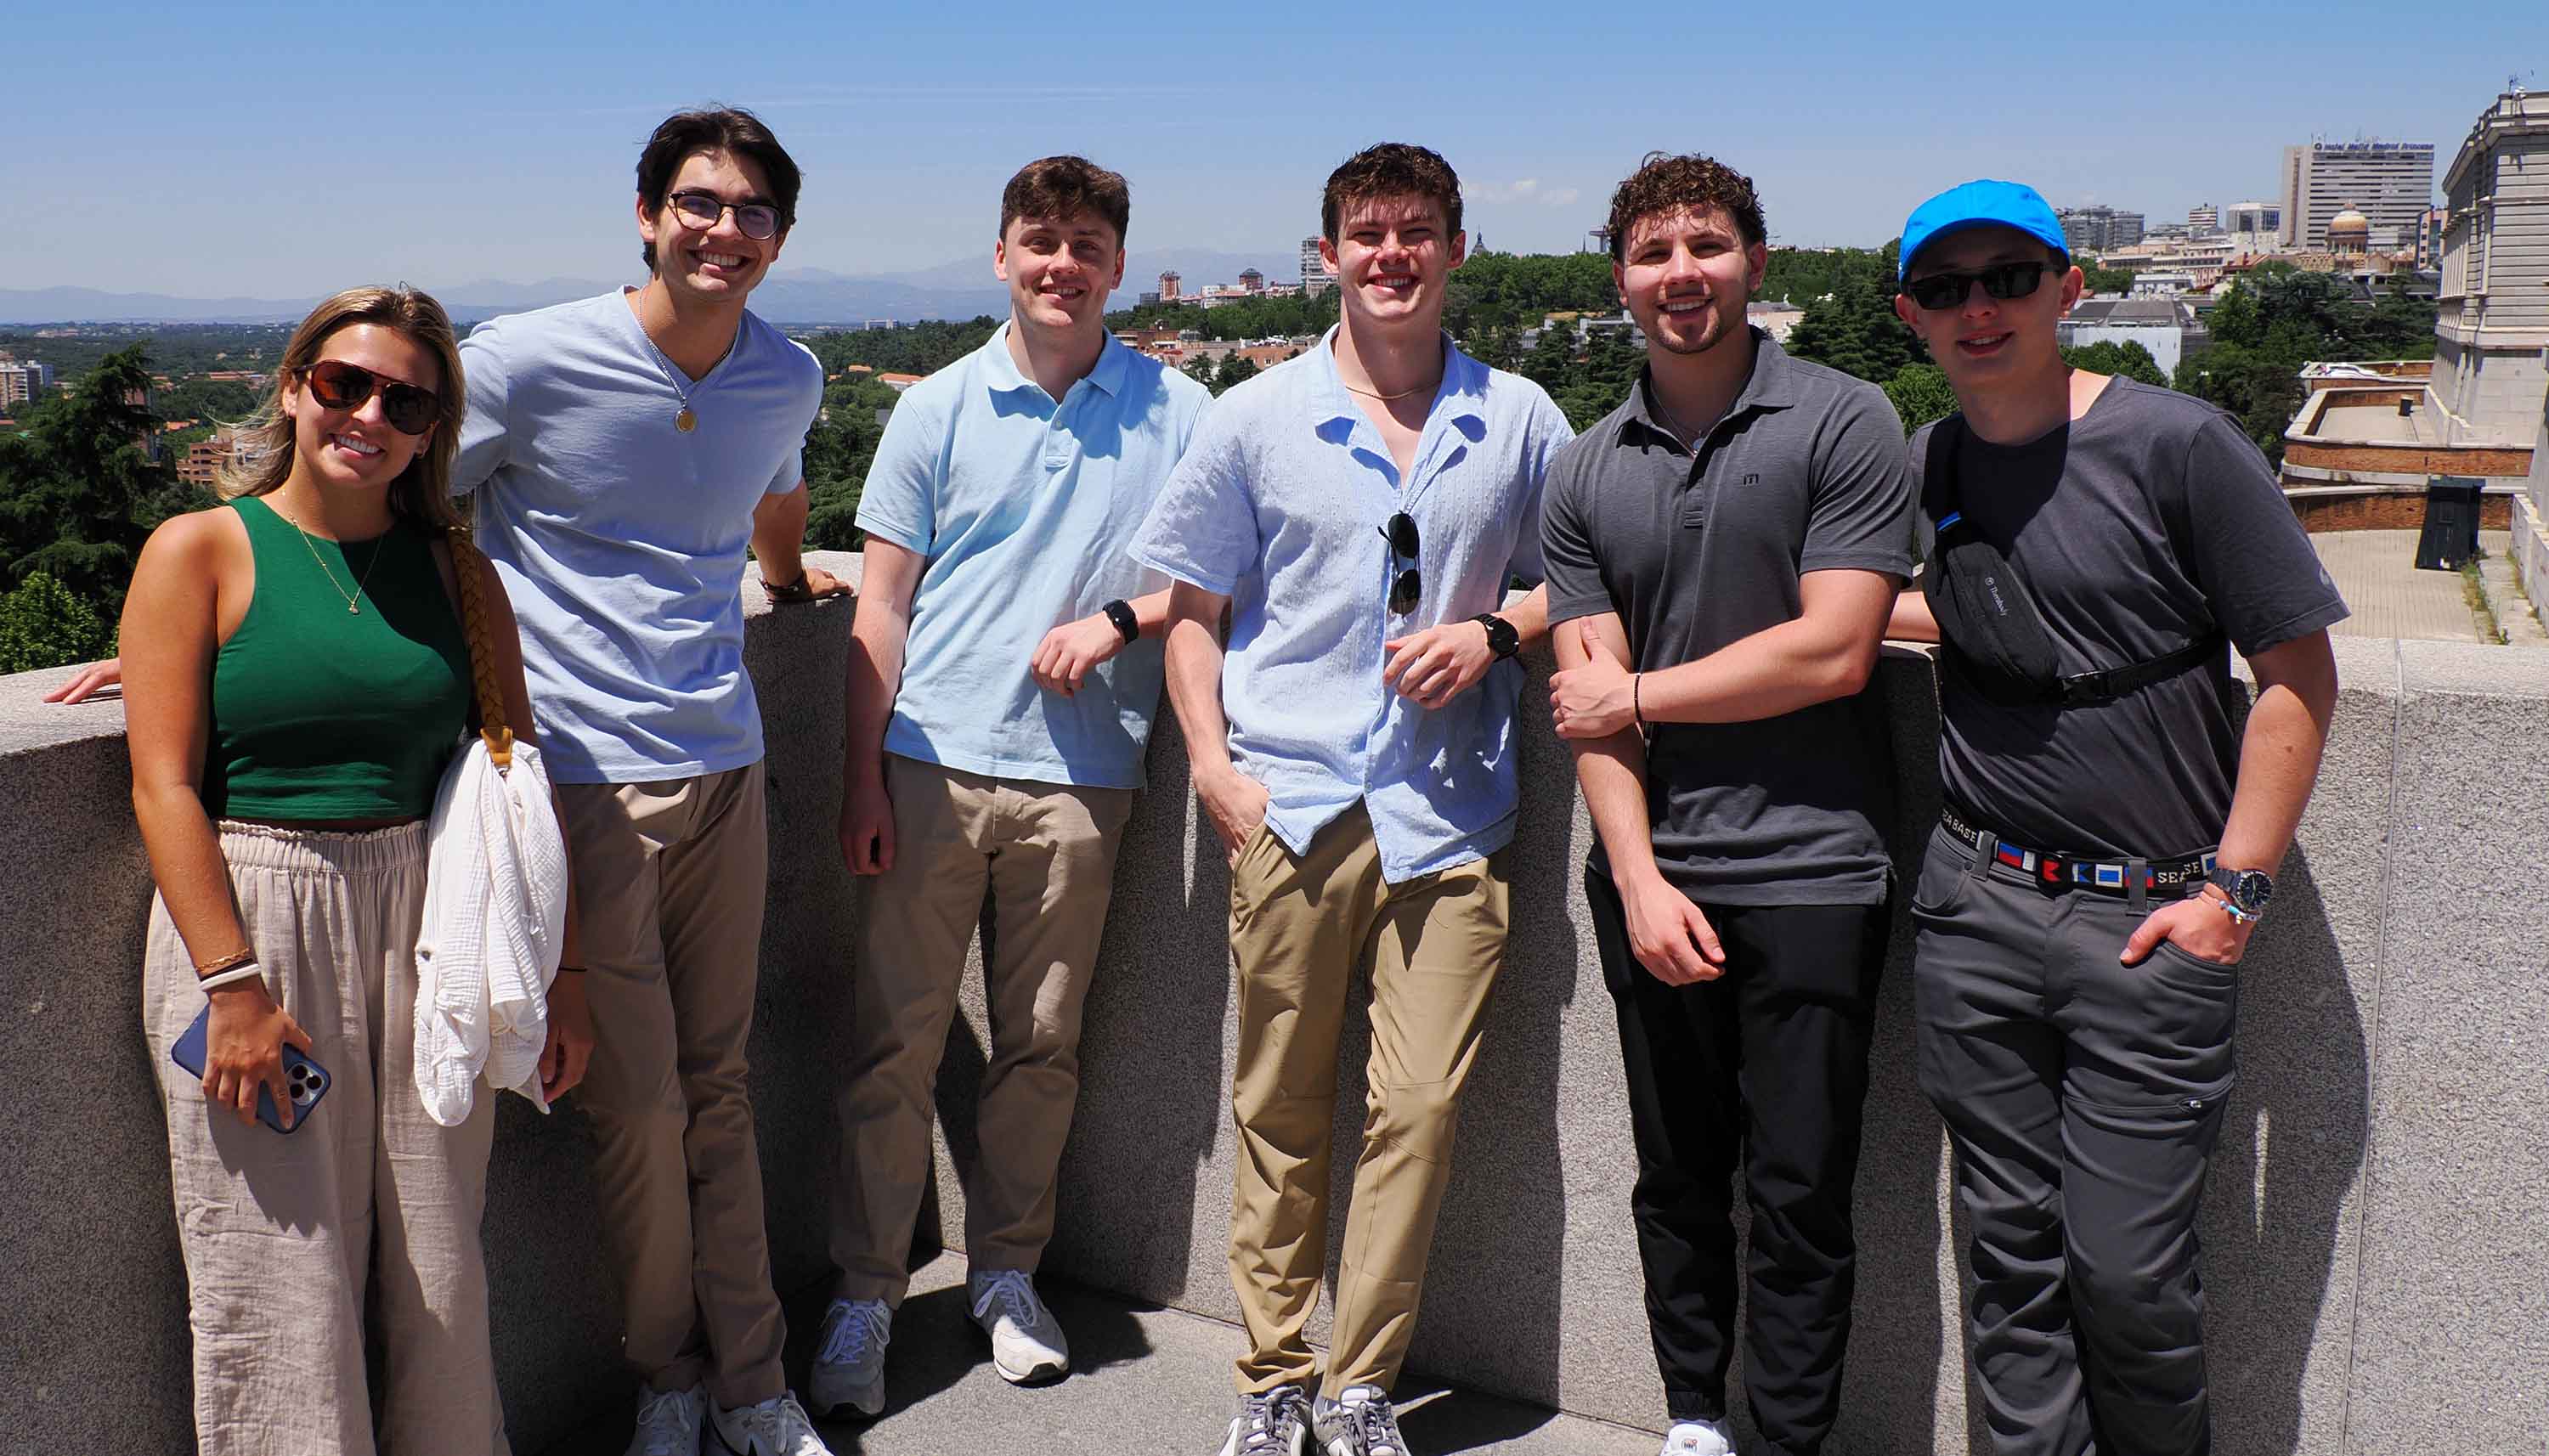 Students pose at a Madrid overlook